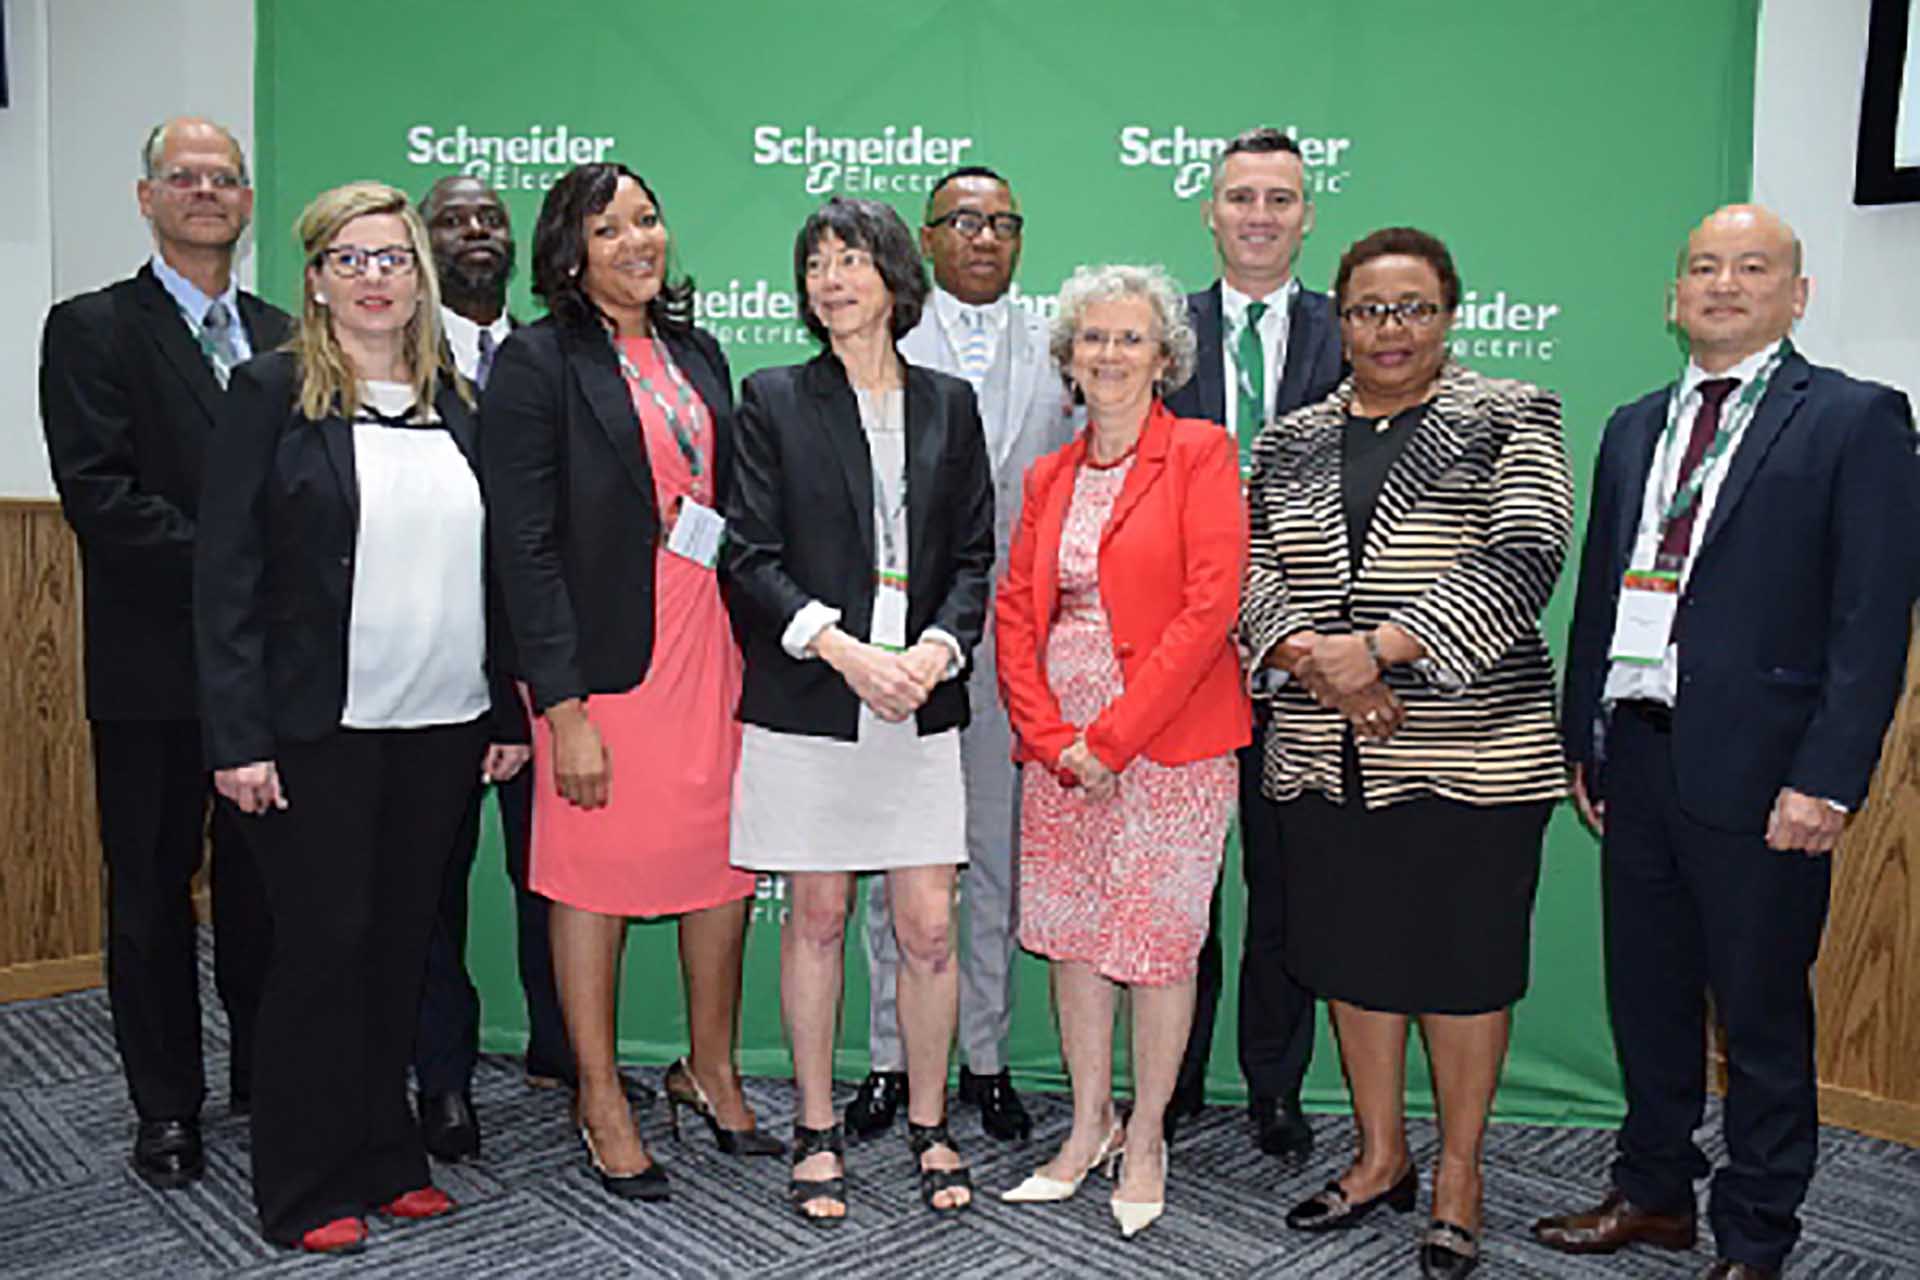 UJ-Schneider Electric’s €100,000 investment fosters engineering education